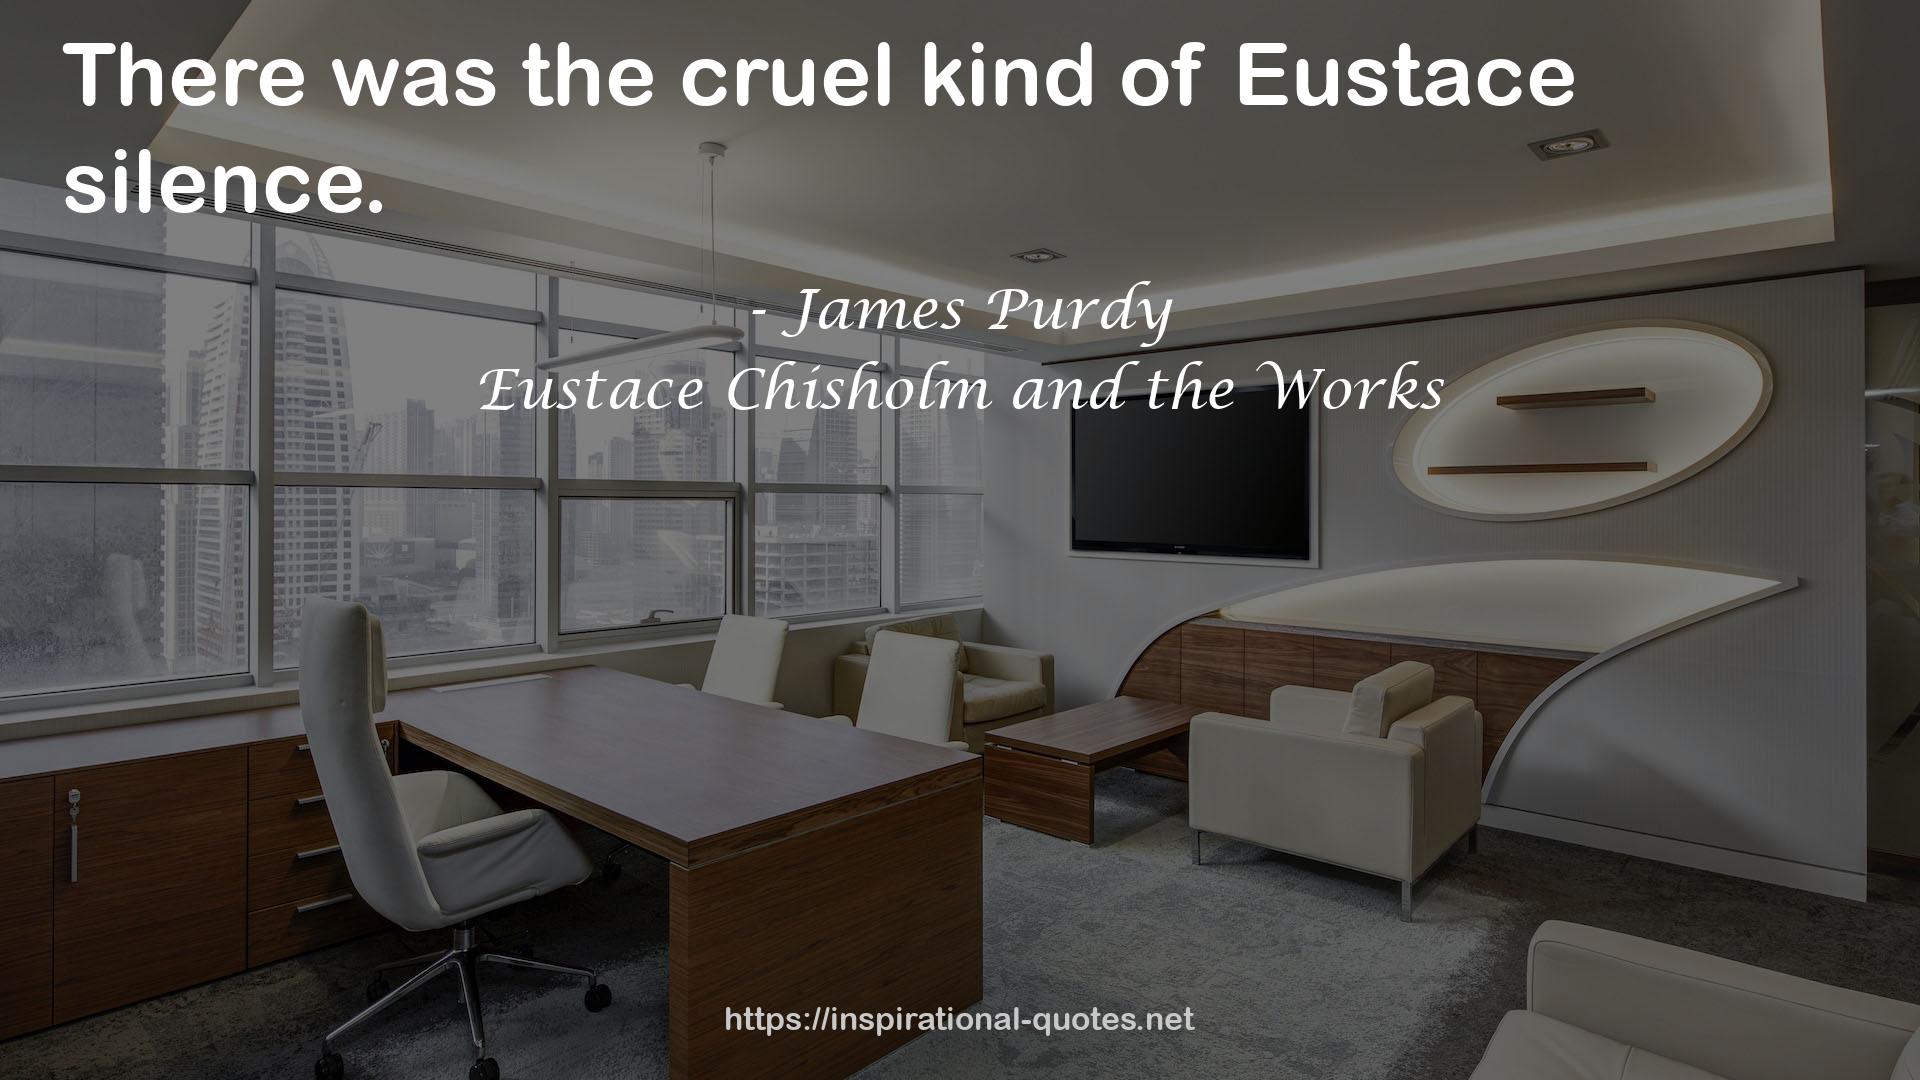 Eustace Chisholm and the Works QUOTES